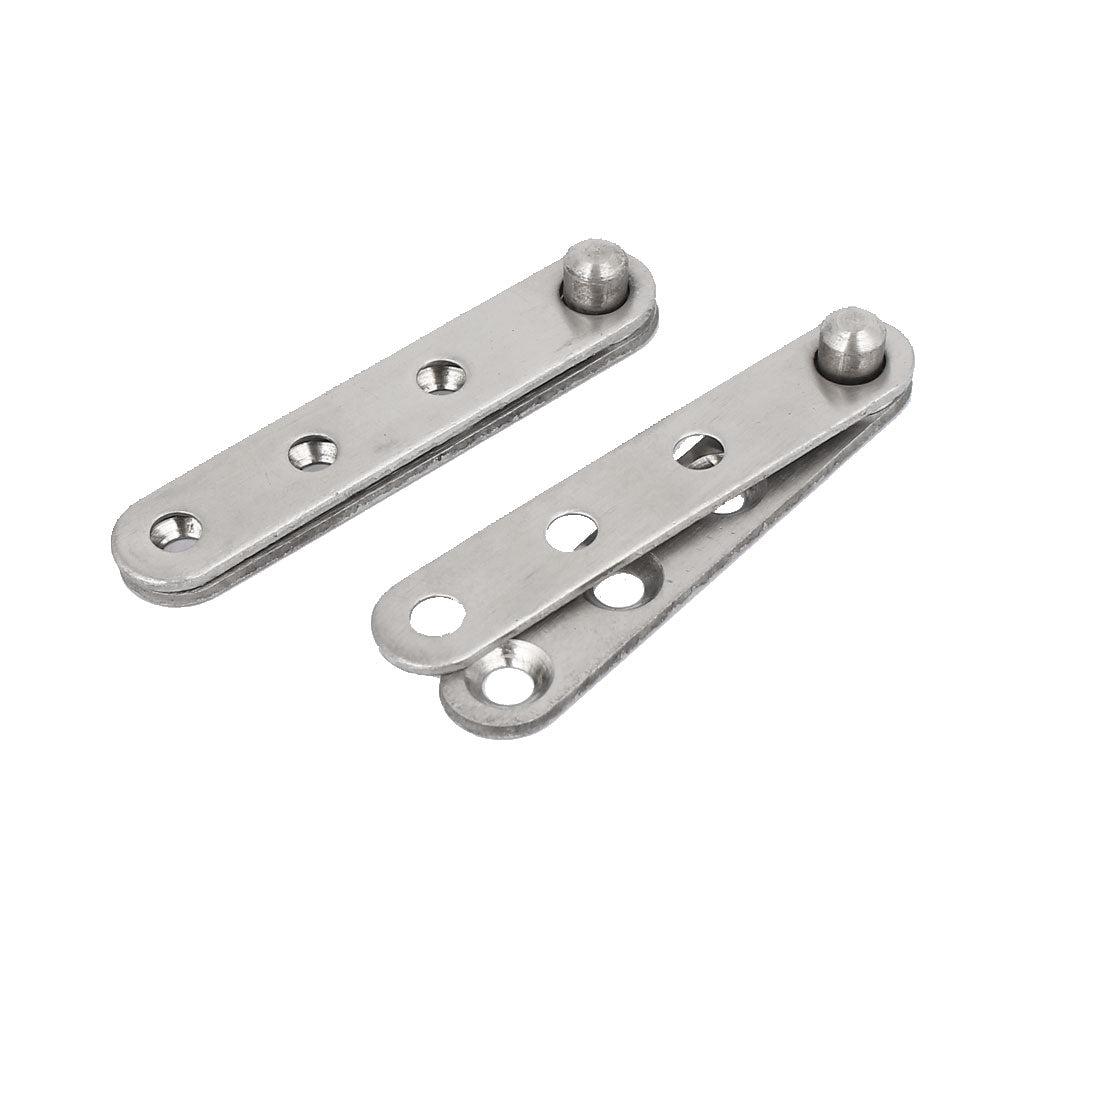 uxcell Uxcell 60mm Length Metal 360 Degree Rotatable Door Pivot Hinges Silver Tone 2 Pcs